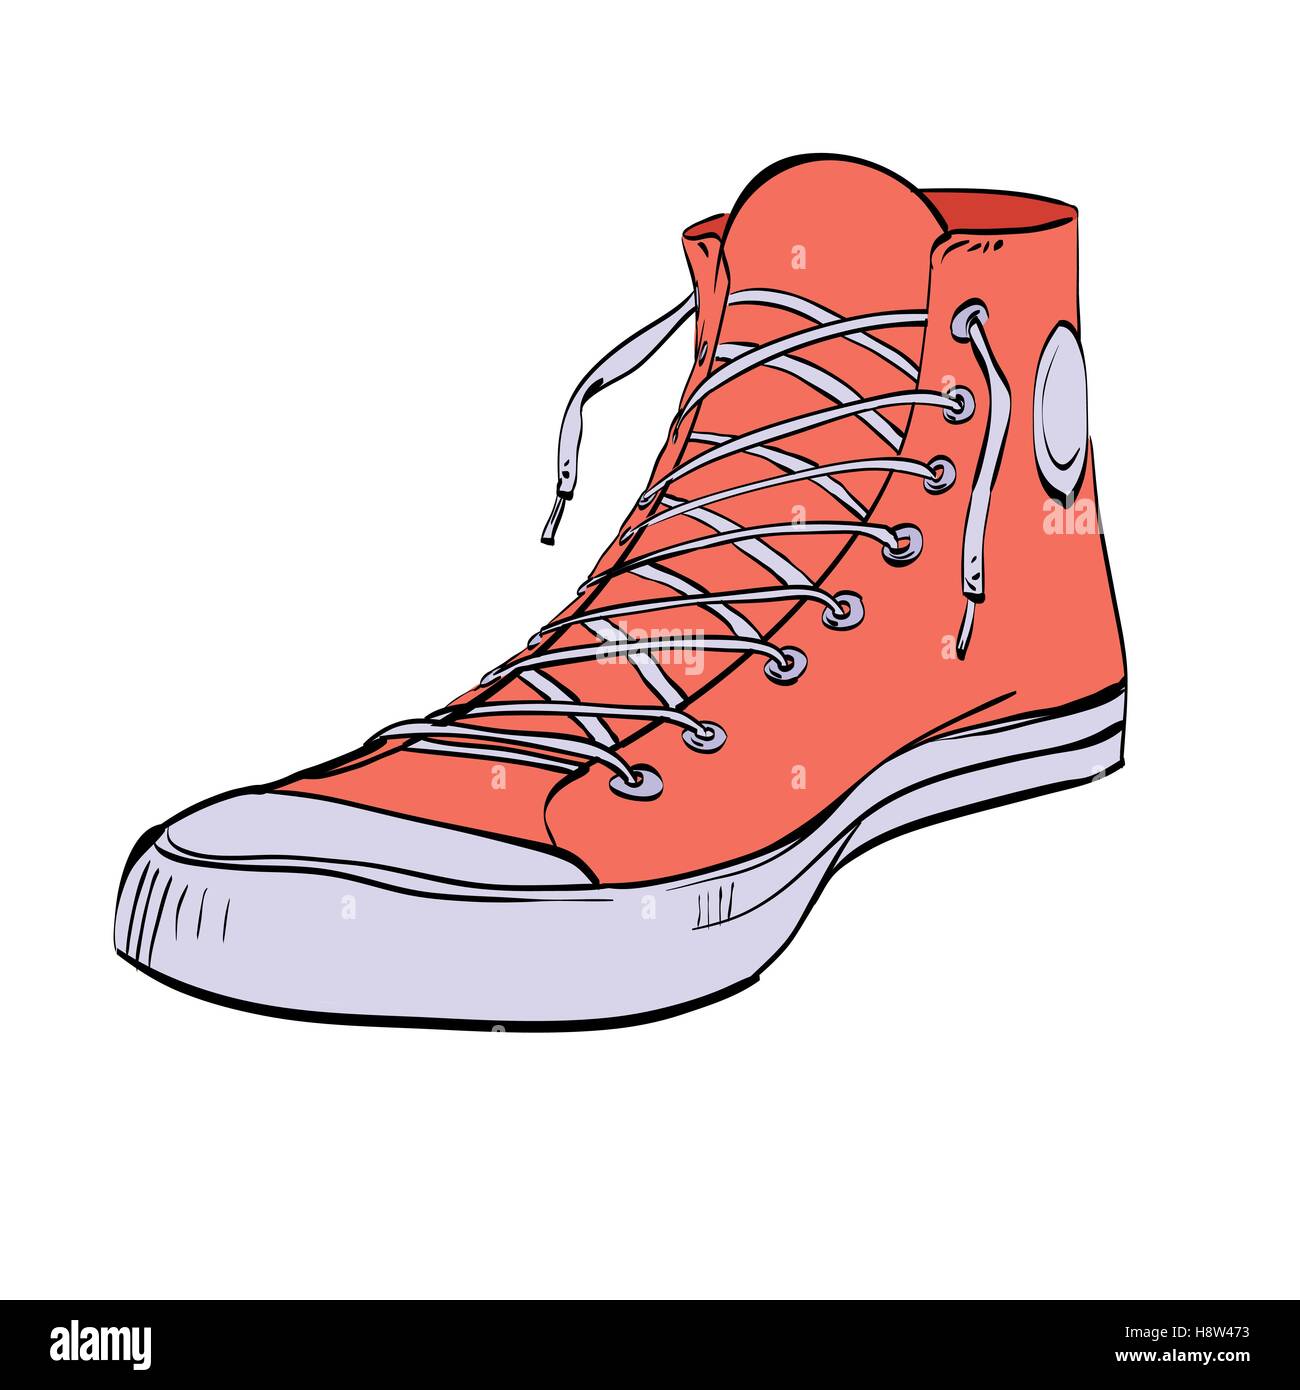 Red sneakers youth shoes Stock Vector